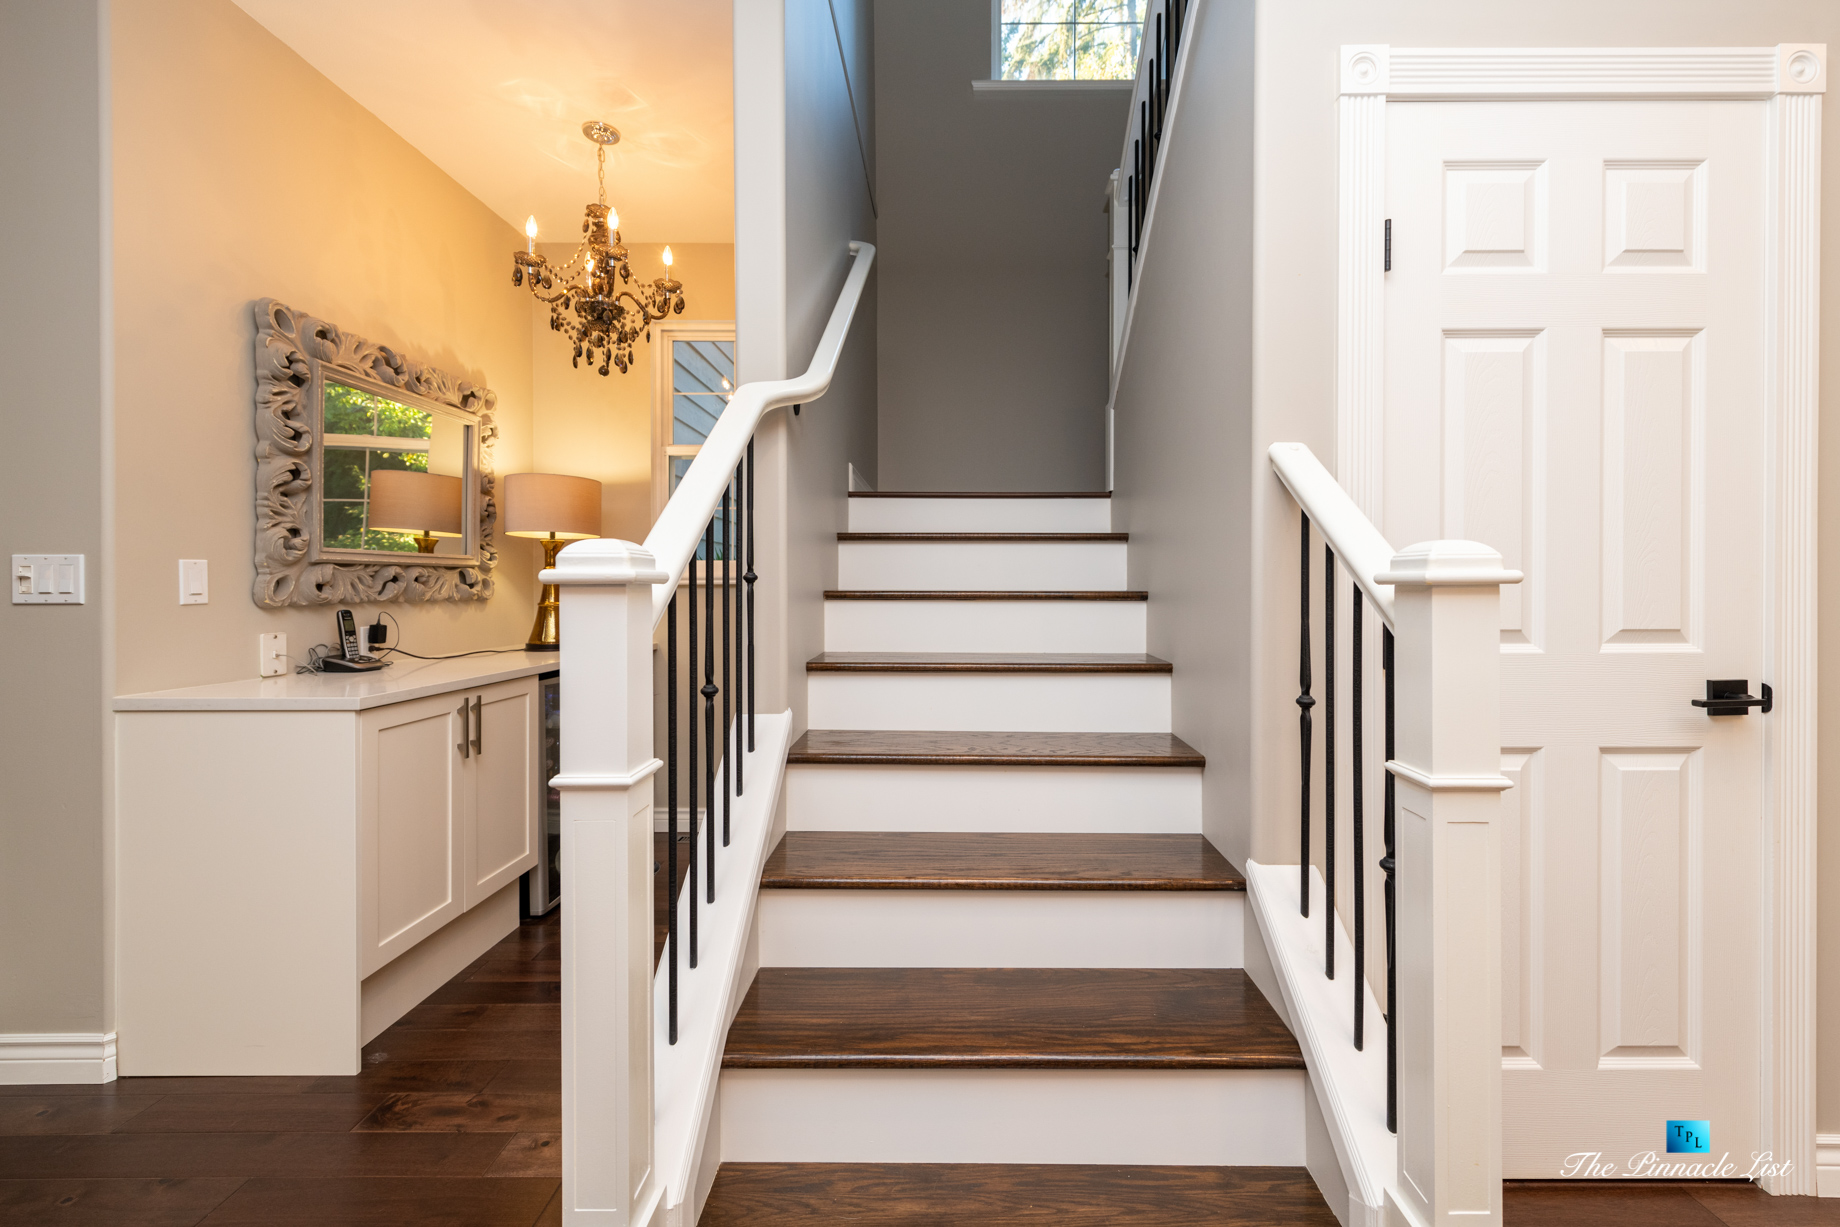 2366 Sunnyside Rd, Anmore, BC, Canada – Kitchen Stairs